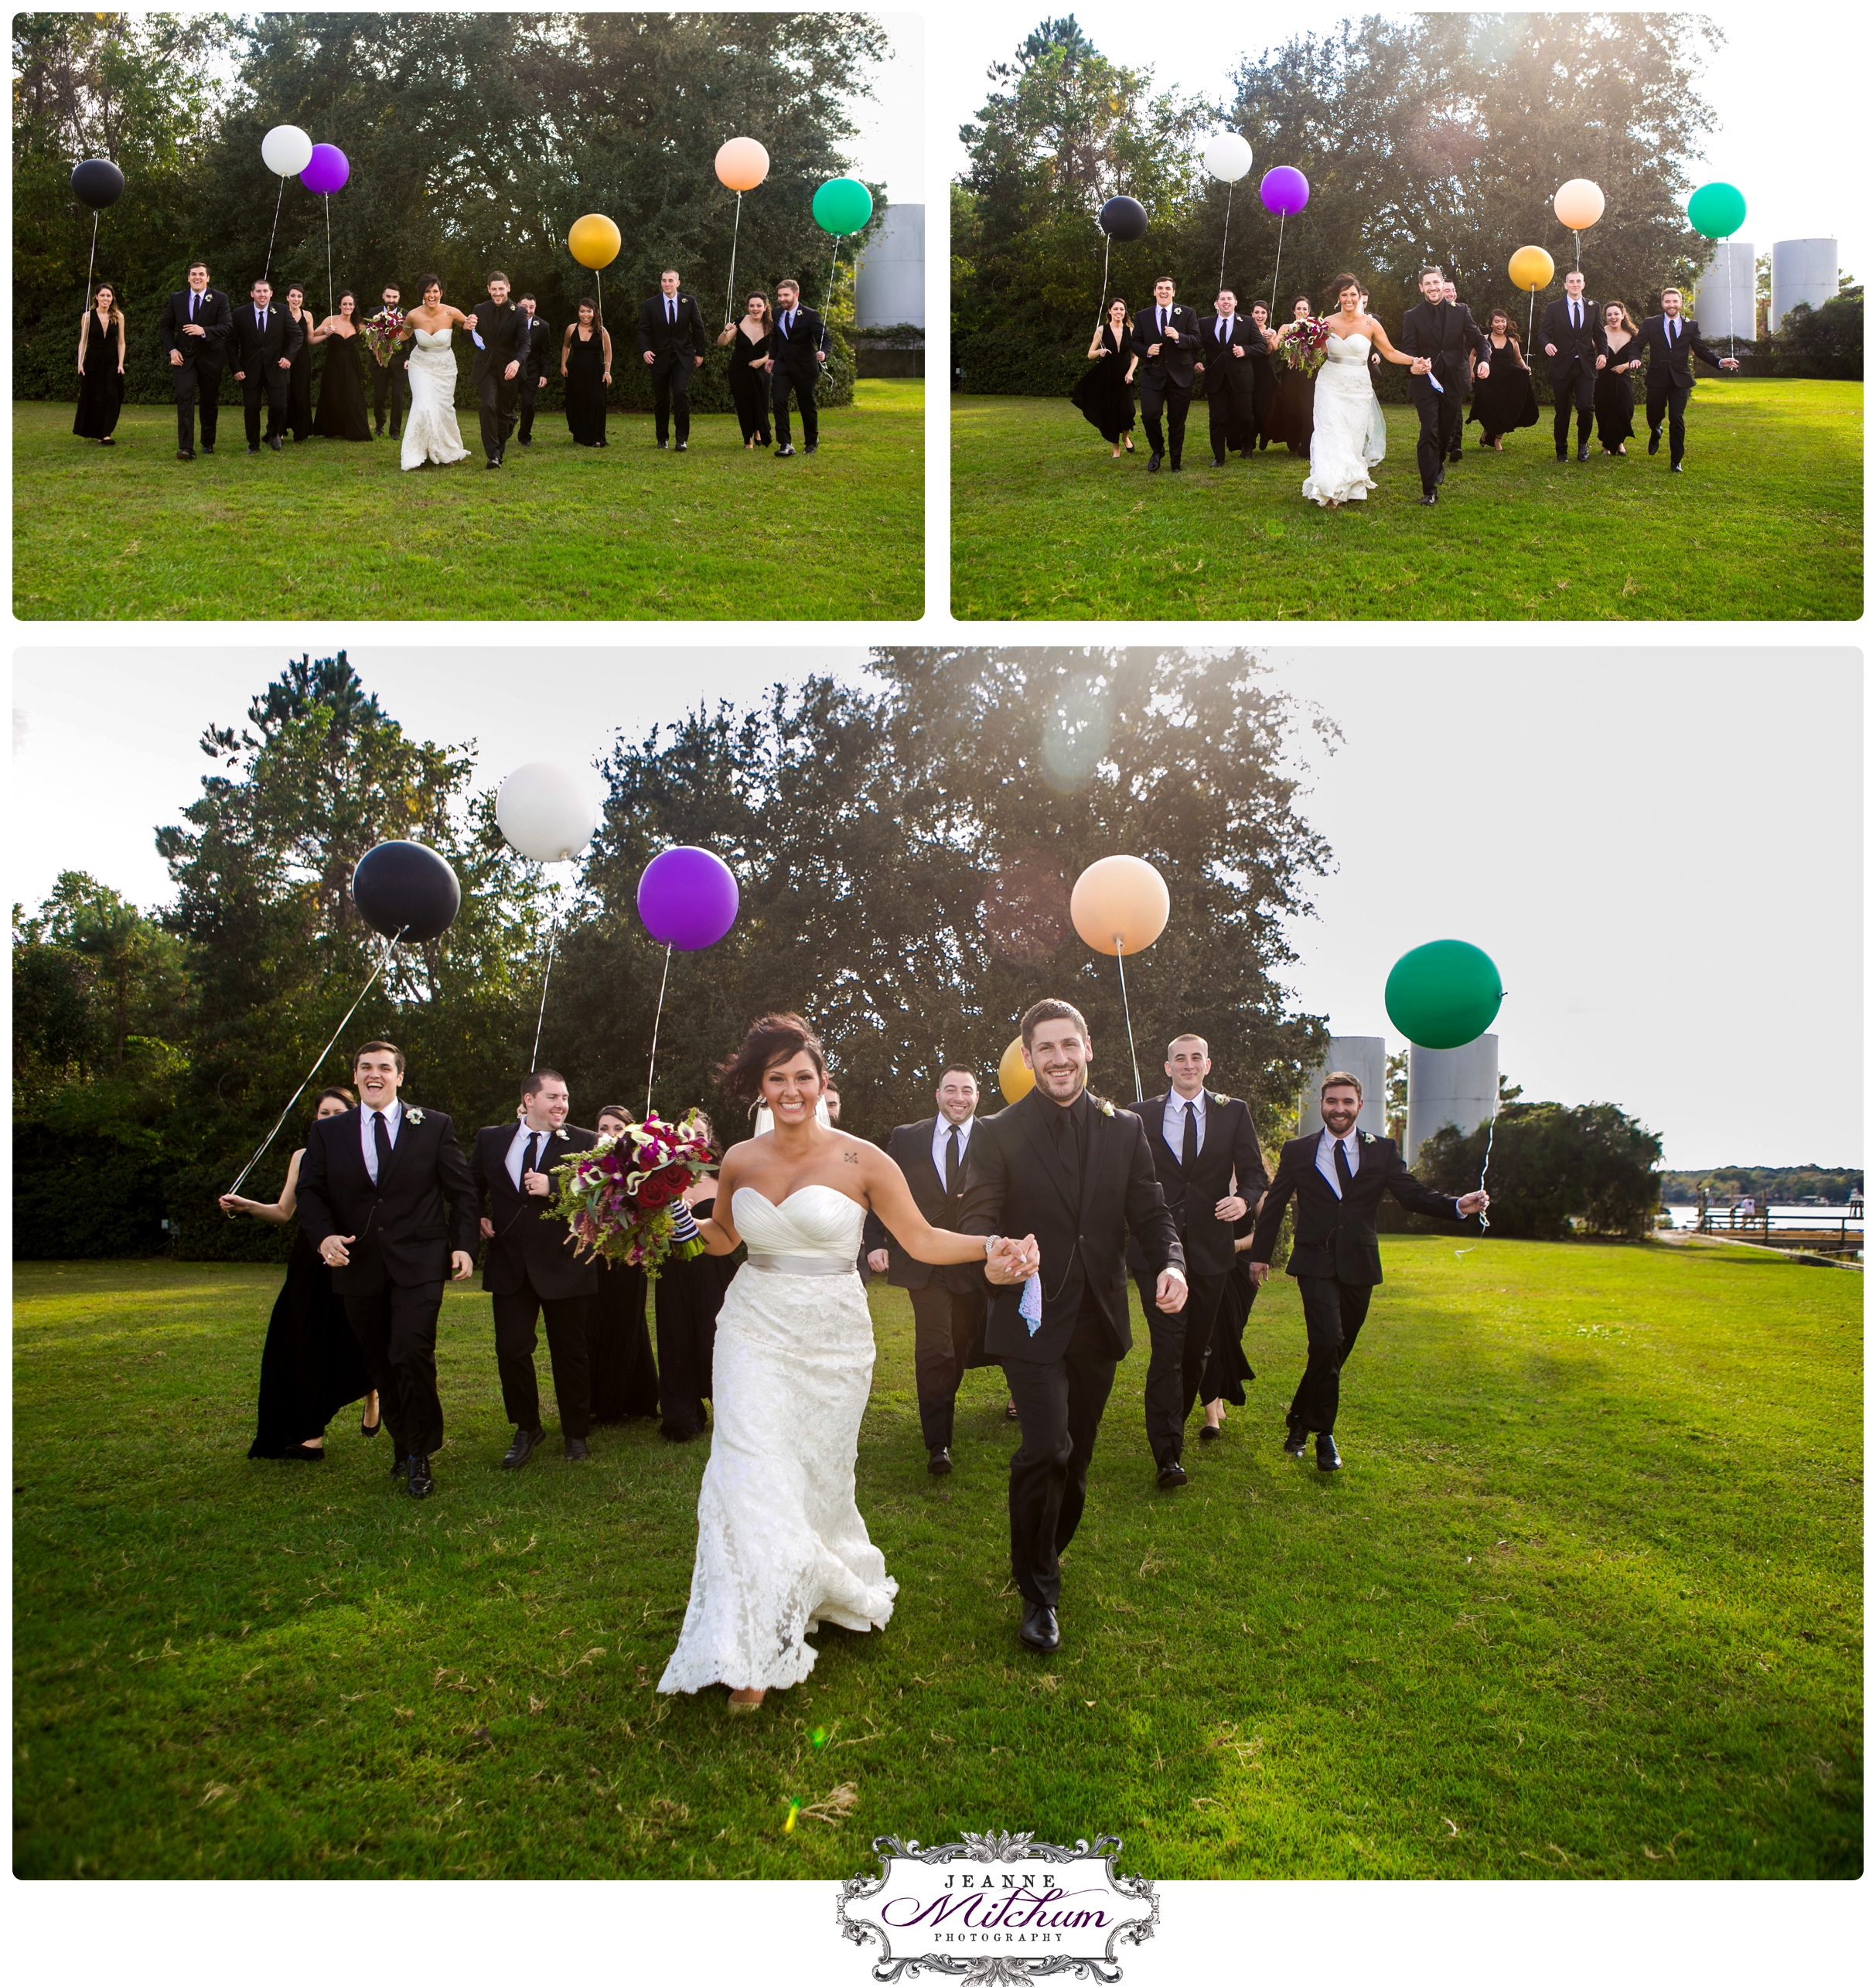 fun wedding party images